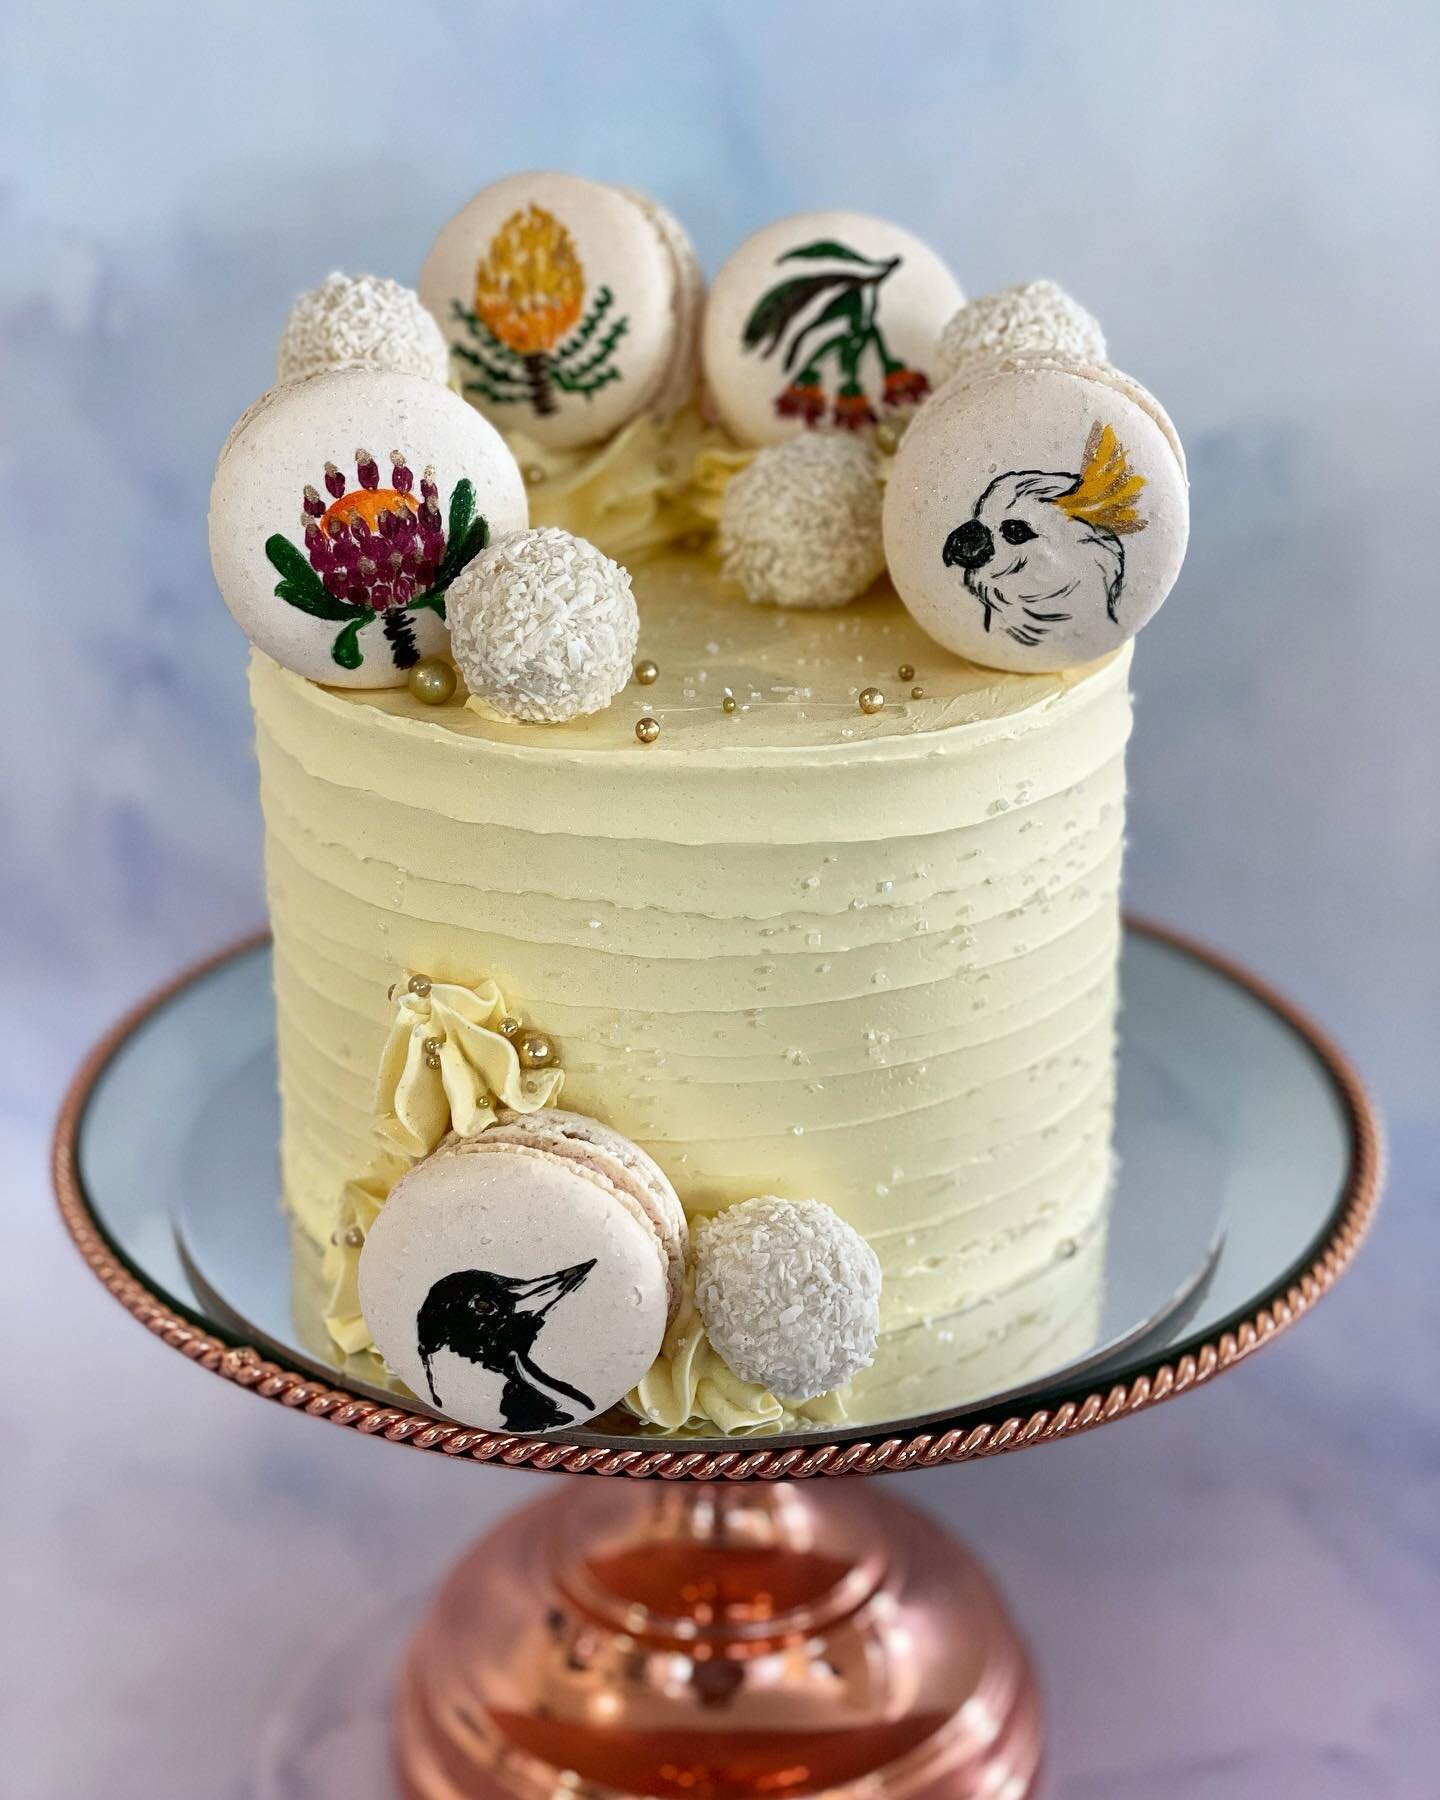 Native Australian Bird &amp; Flora lover cake with hand painted macarons for my beautiful friend&rsquo;s mother @lauzmck #poshlittlecakes #perthcake #perthcakes #cakesofperth #perthcakedesigner #cakesofinstagram #buttercream #buttercreamcakes #native